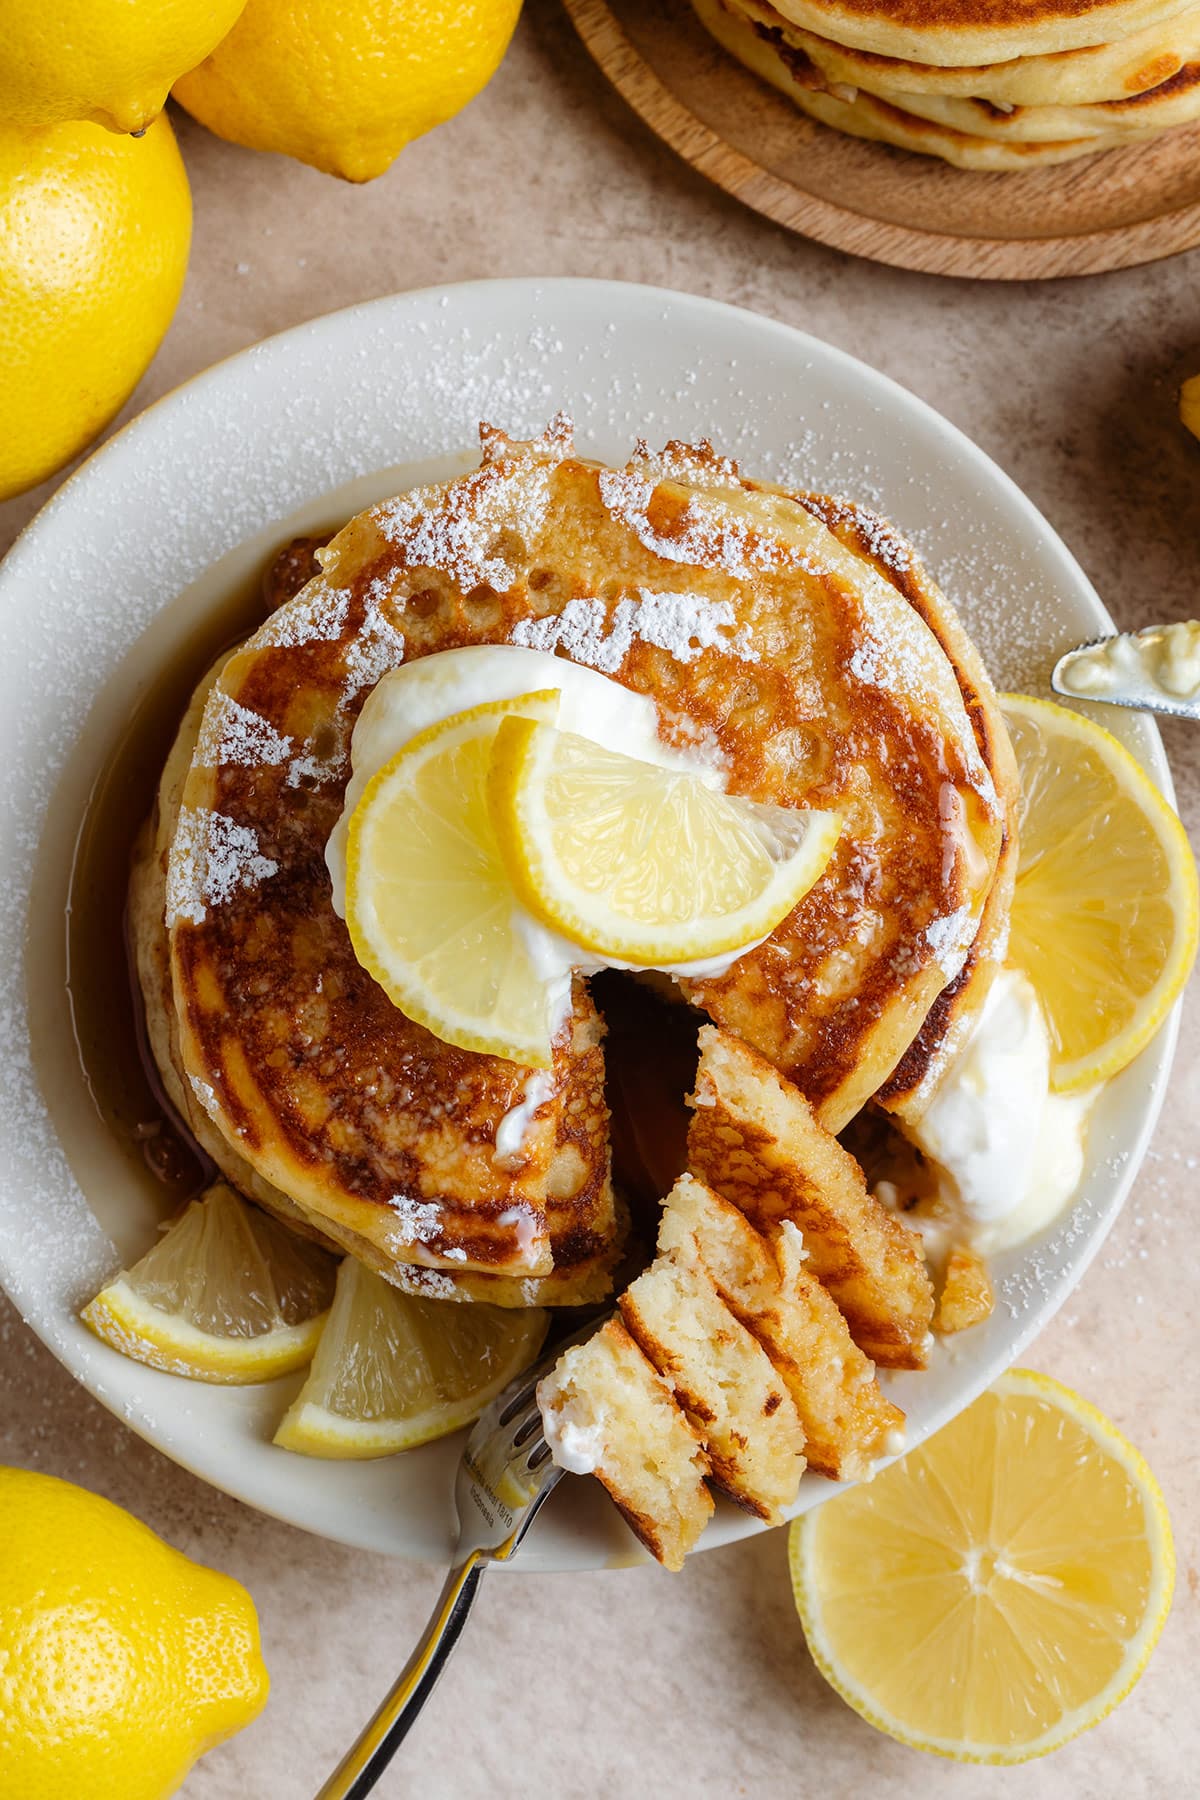 A stack of pancakes garnished with lemon slices, yogurt, and maple syrup with a piece cut out and resting on the side on a fork.